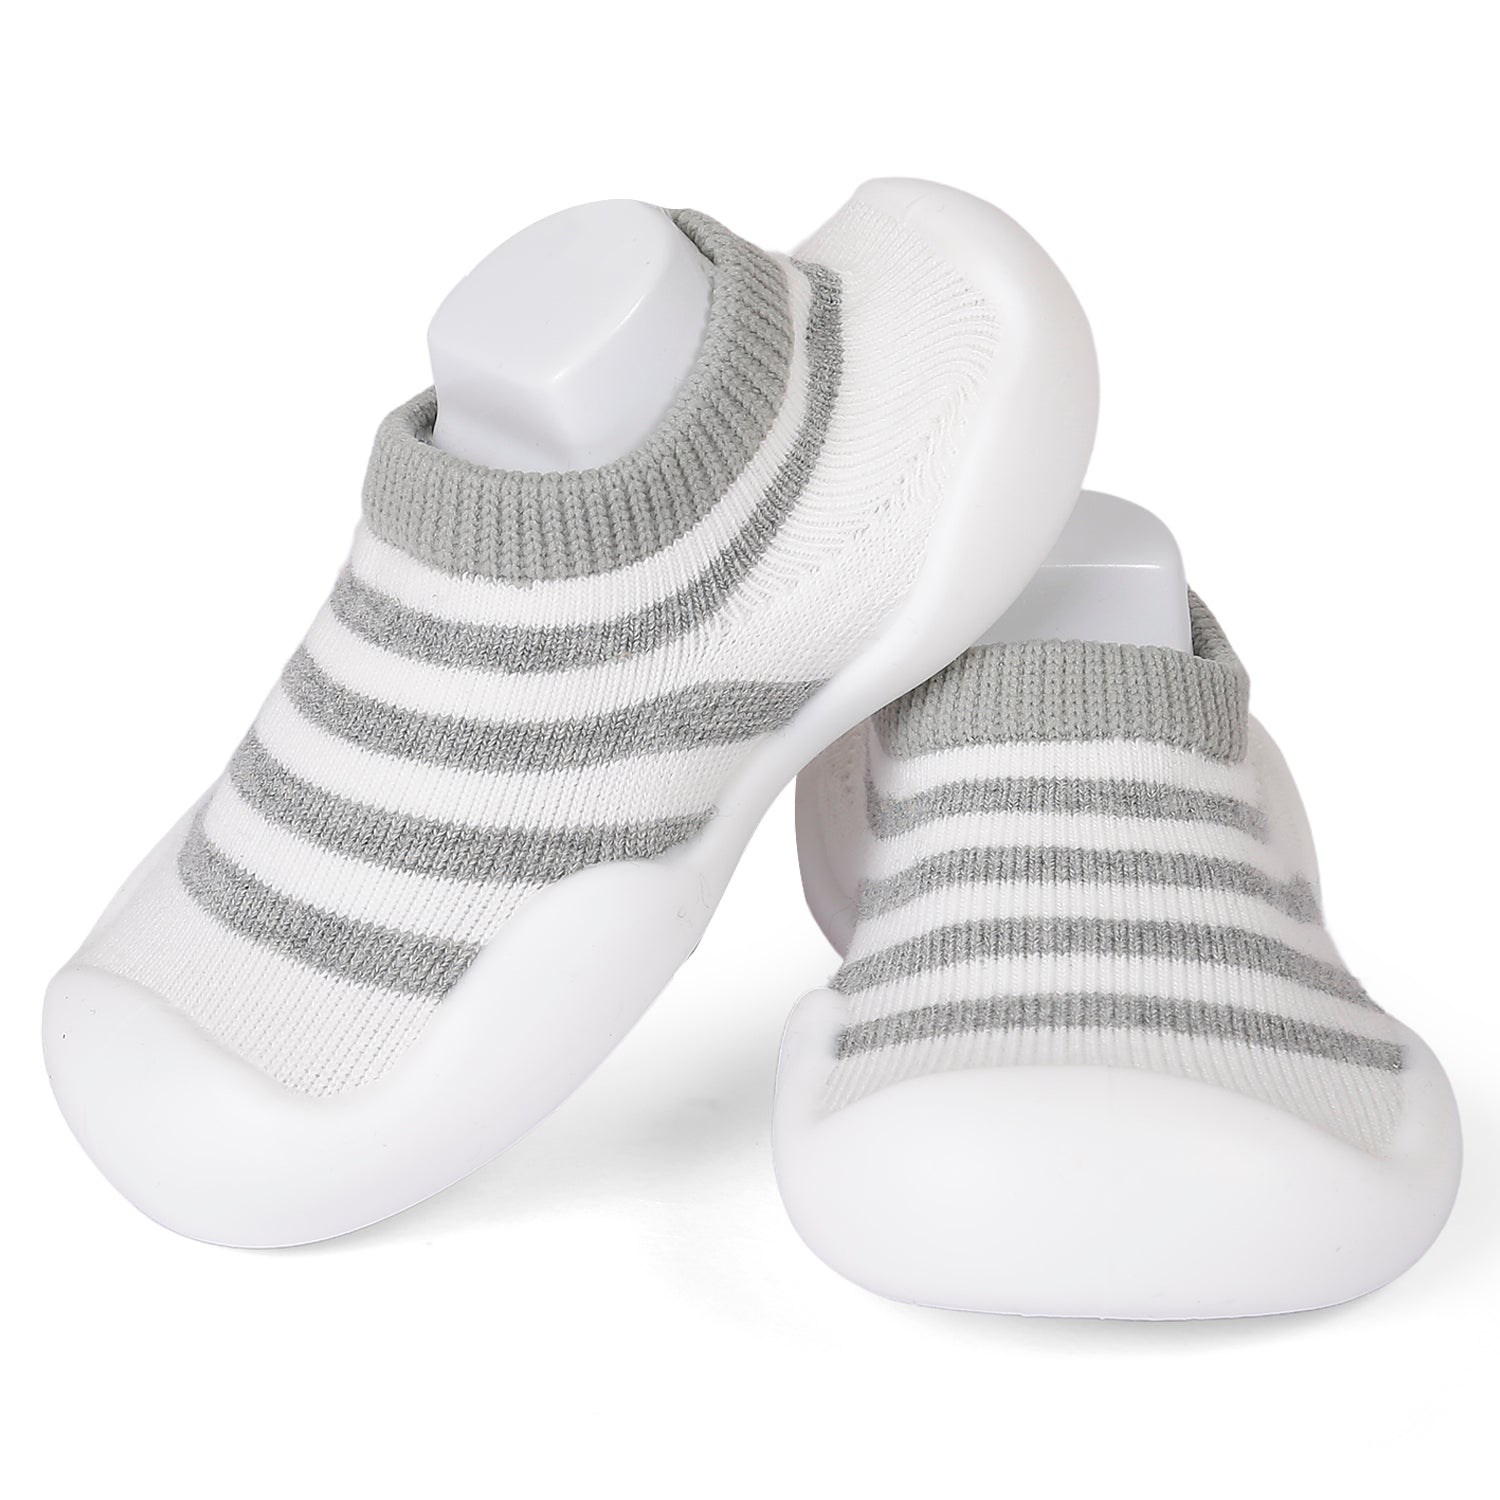 Slip-On Shoes Striped Grey - Baby Moo